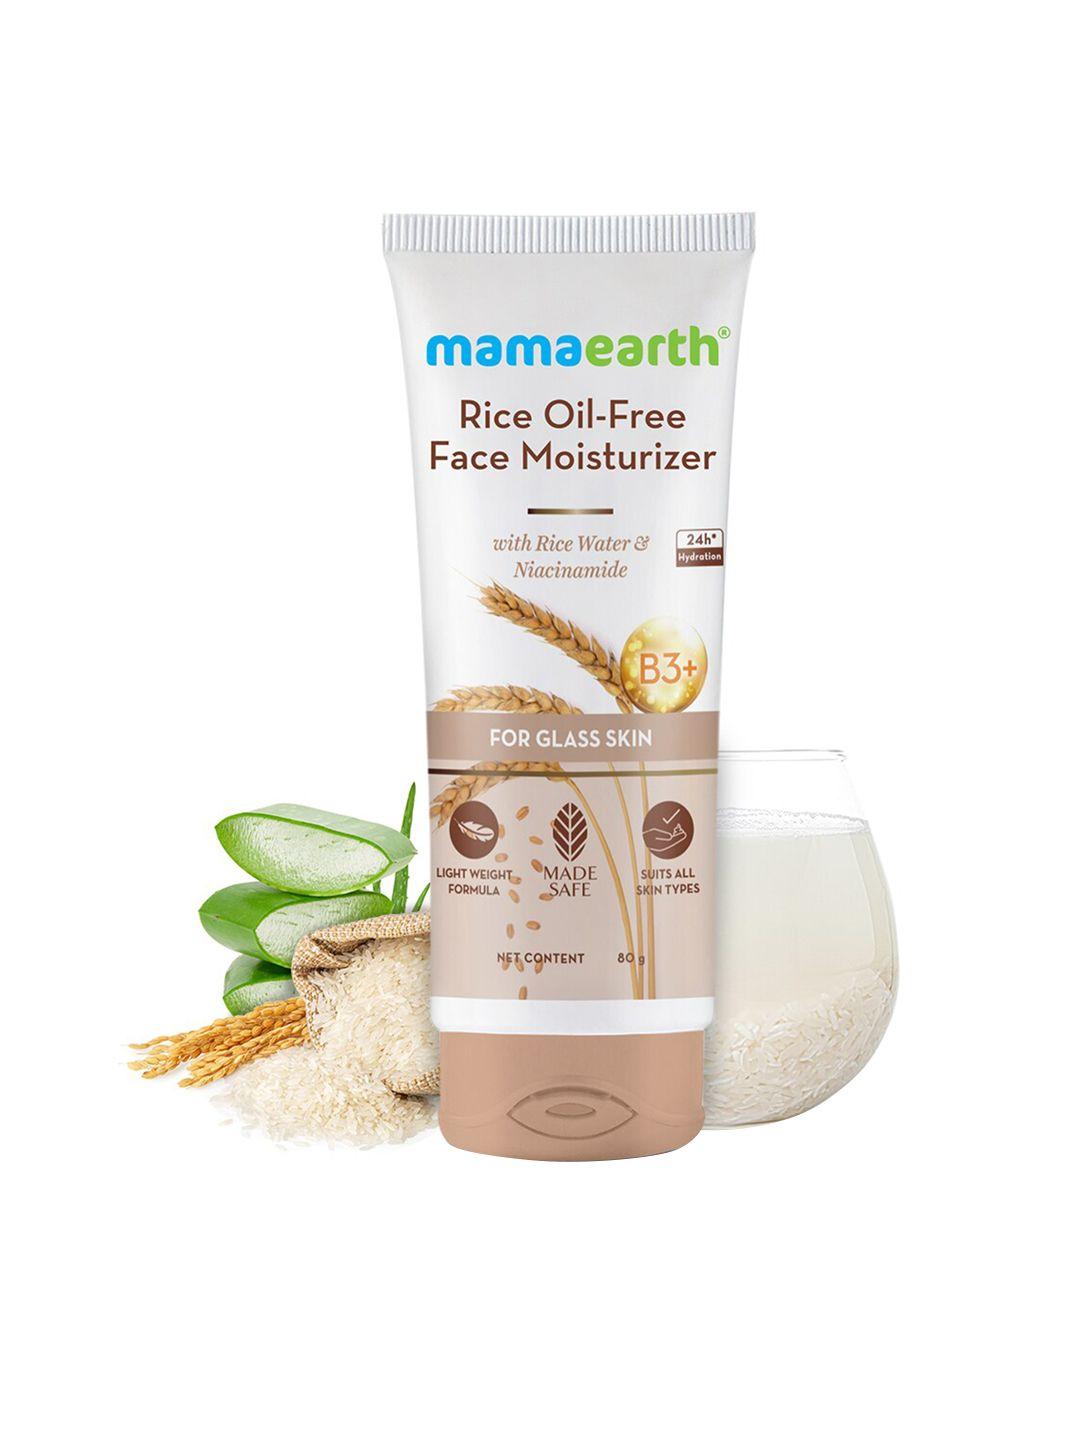 mamaearth-rice-oil-free-face-moisturizer-with-rice-water-&-niacinamide-80-g